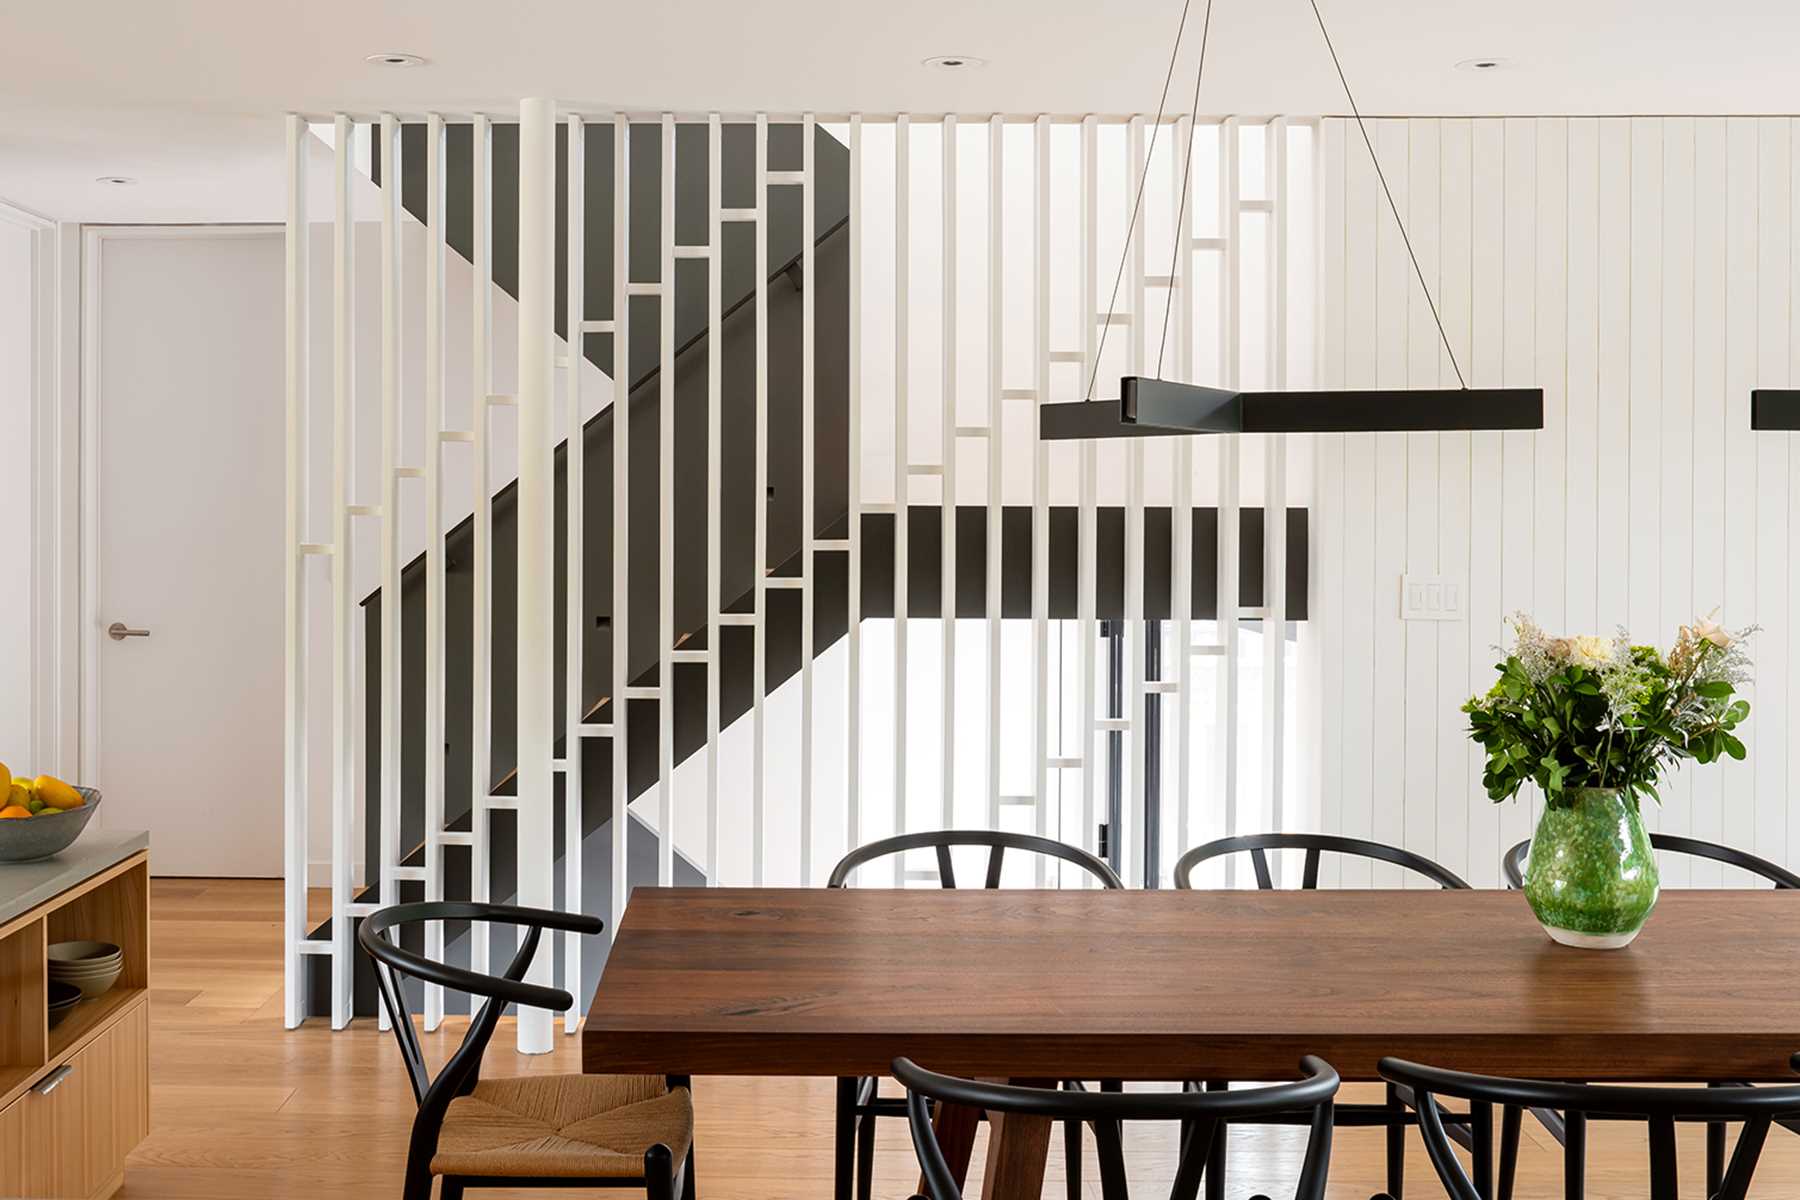 Modern black and wood stairs with a white partition wall.